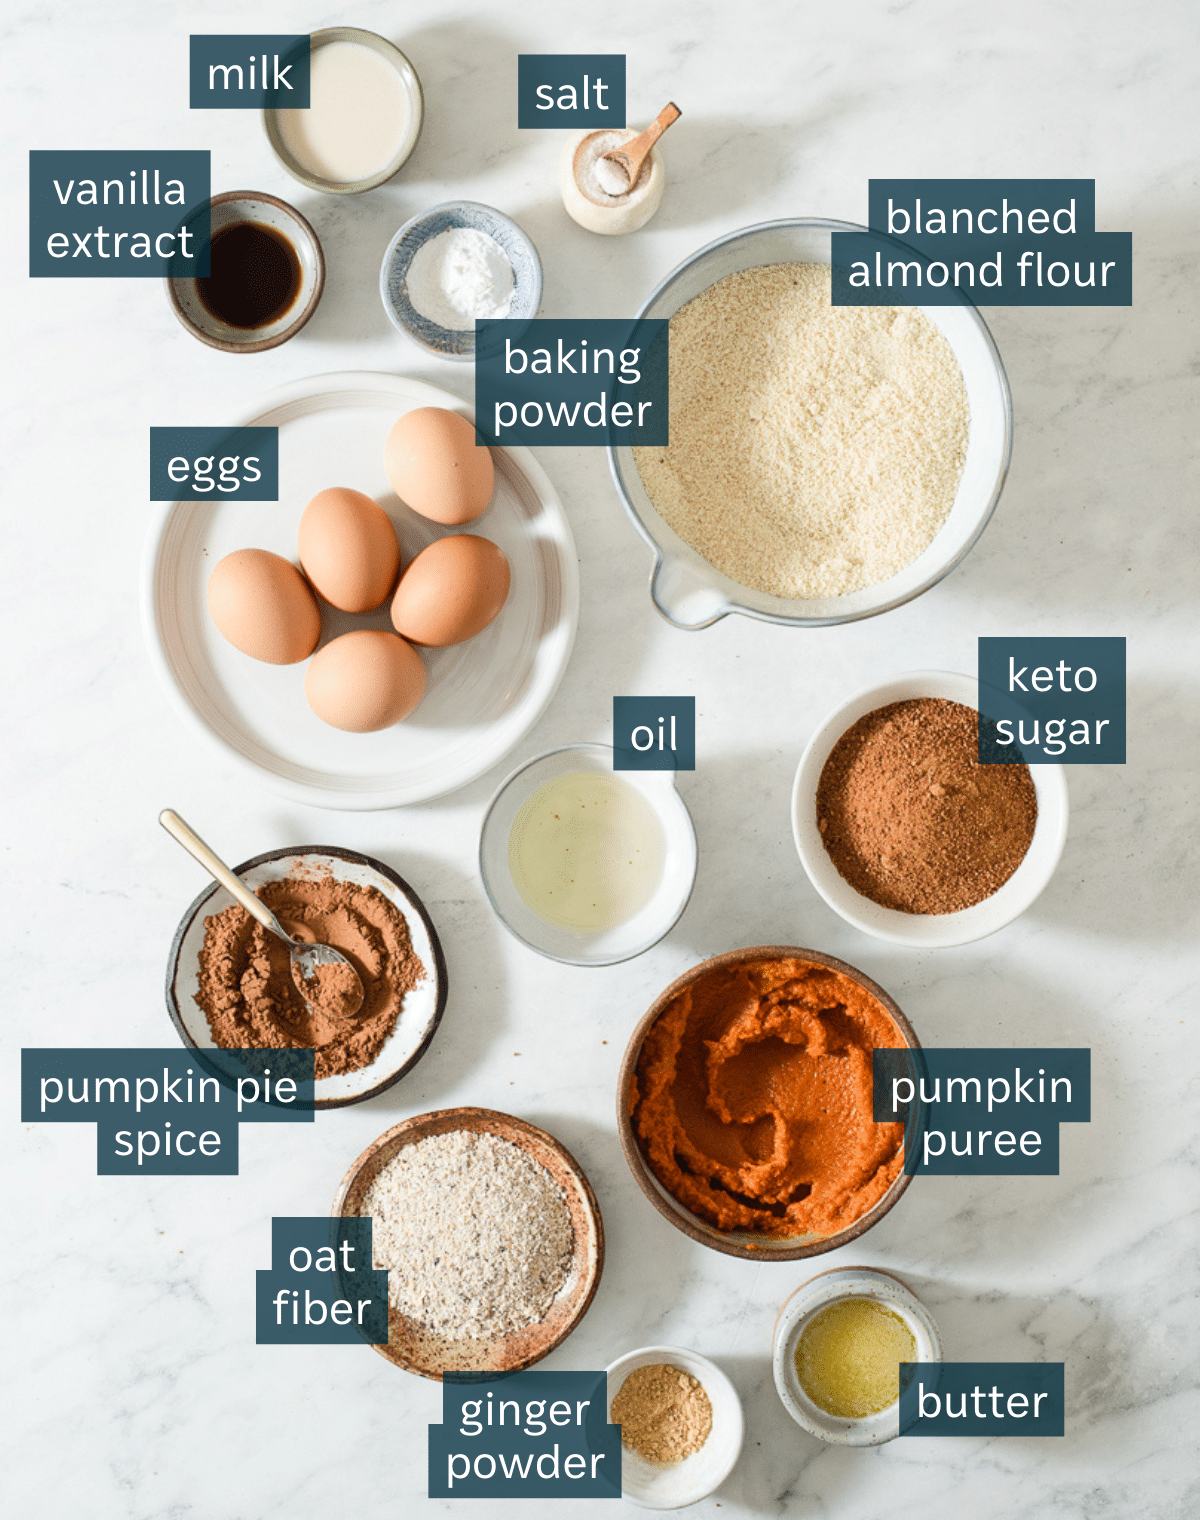 All of the ingredients for keto pumpkin bread in different sized bowls on a marble surface.